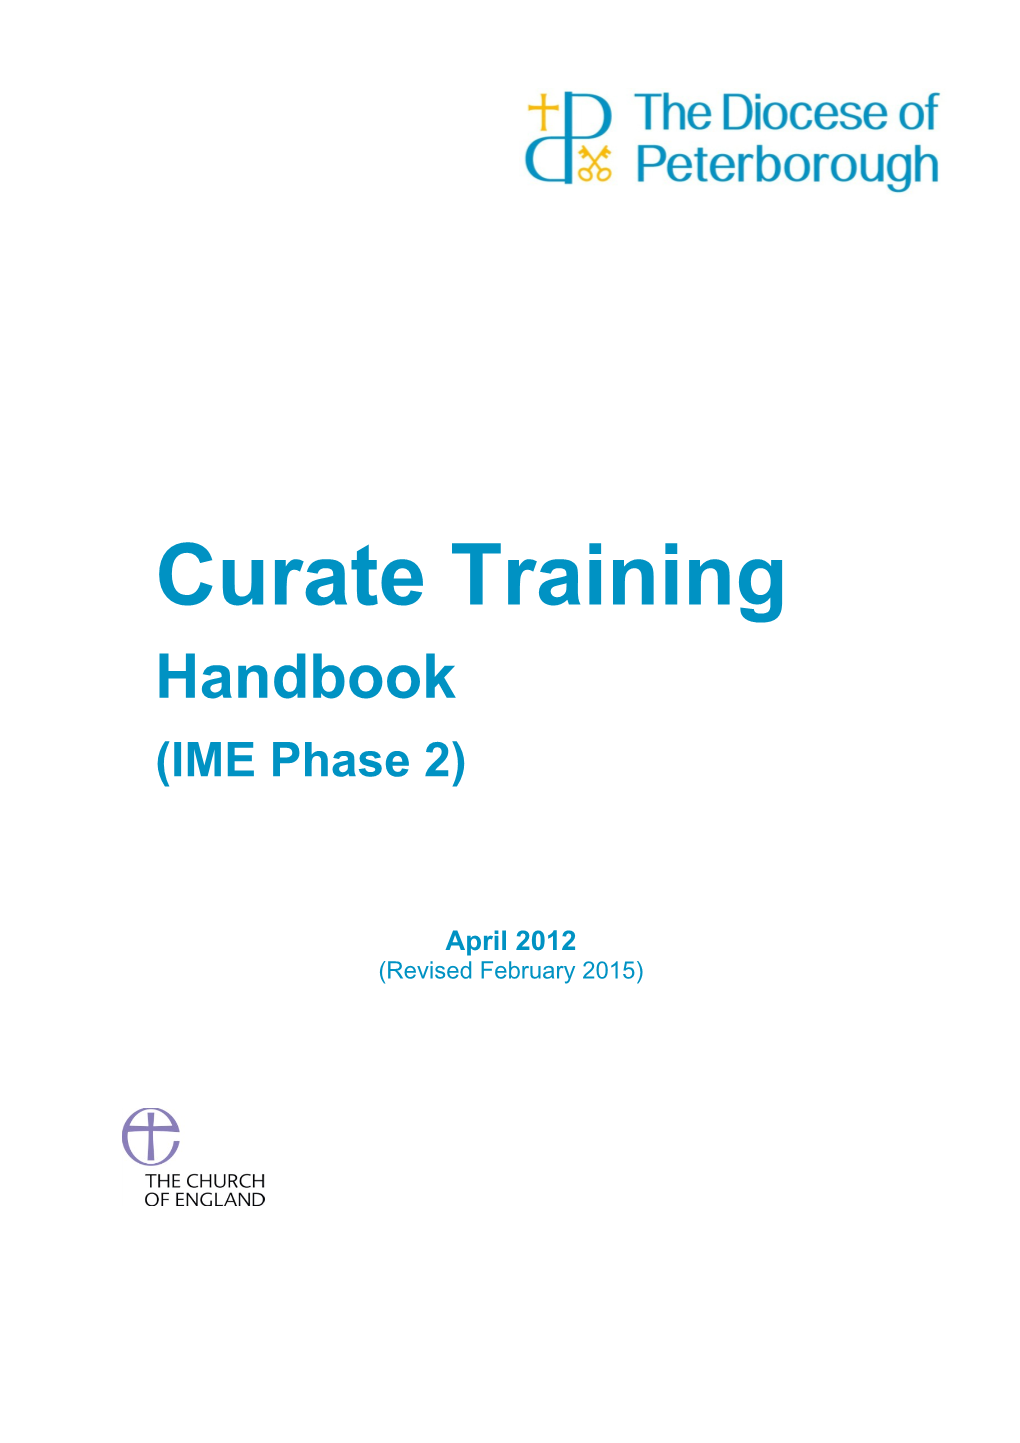 Curate Training Programme in the Diocese of Peterborough